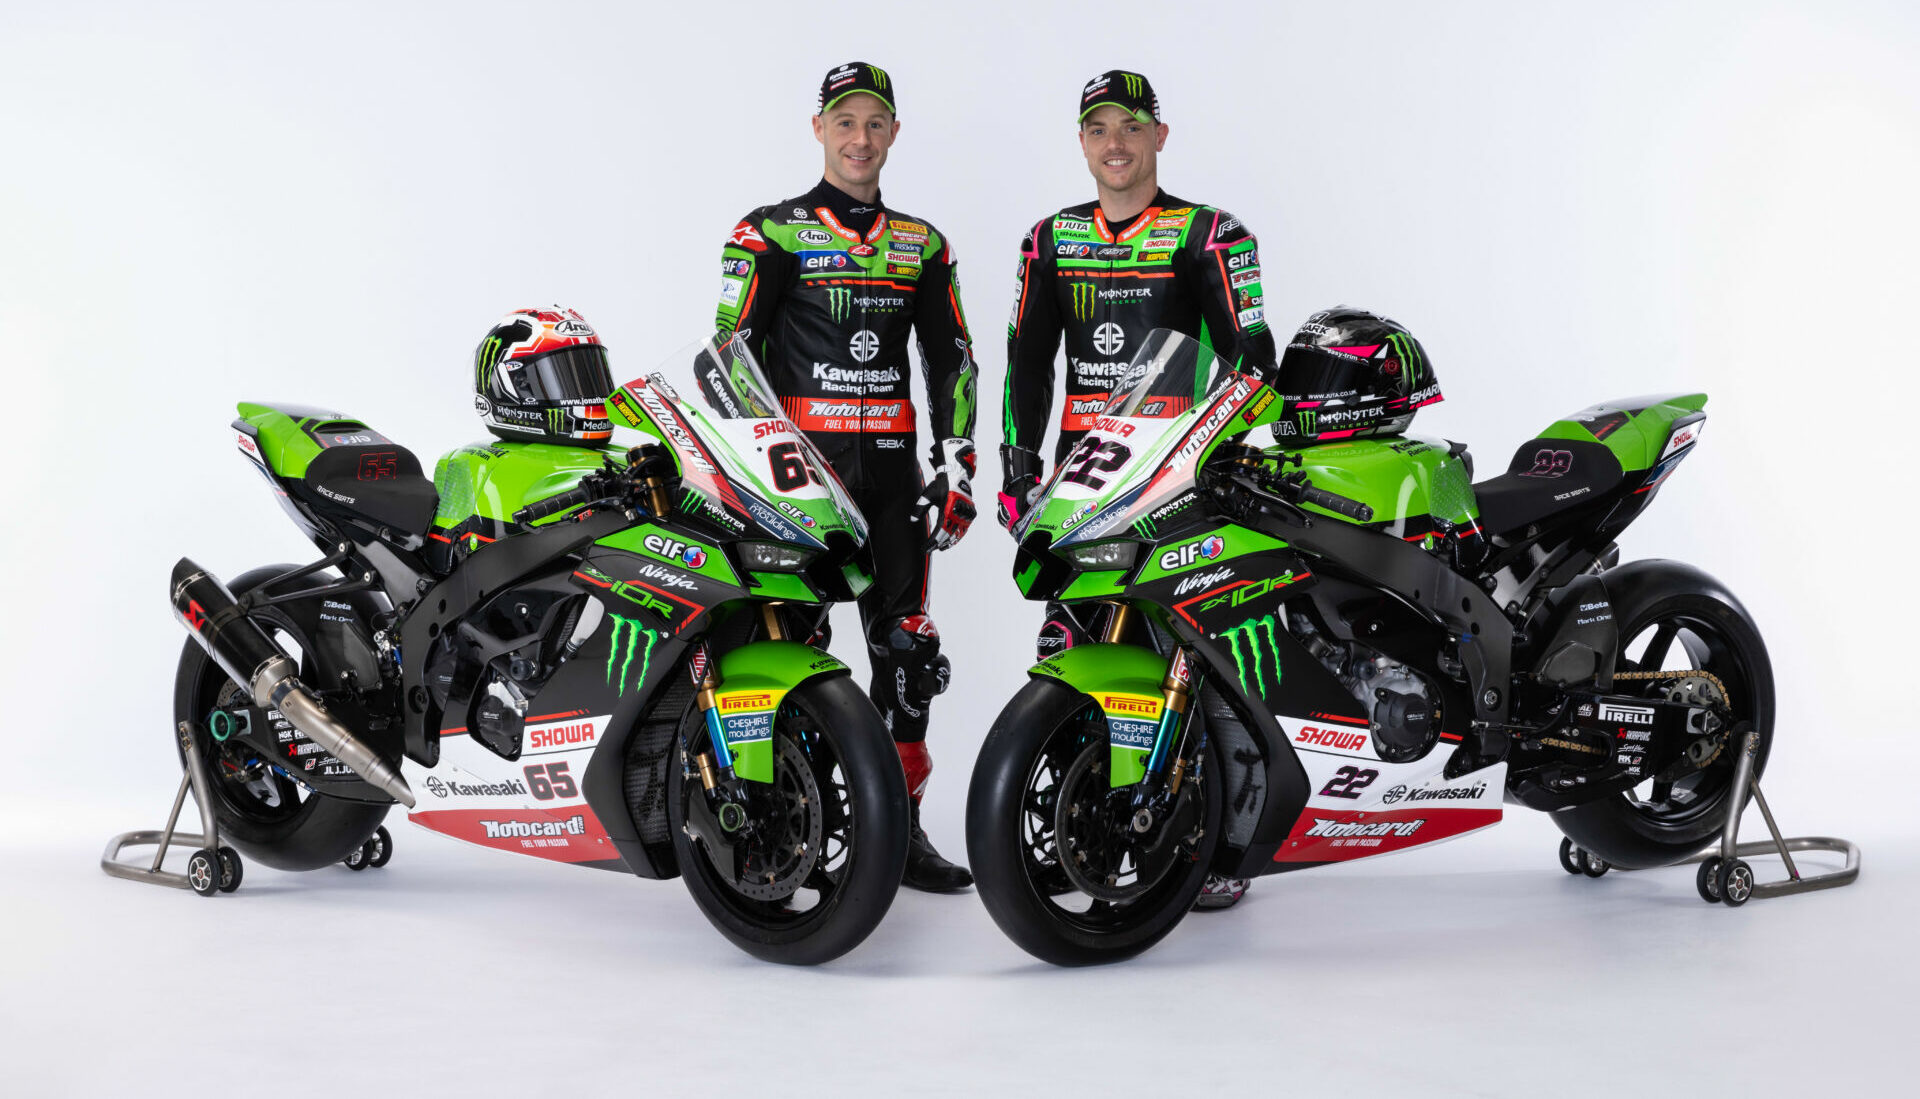 Worldsbk Rea Ready To Get The Title Back Includes Video Roadracing World Magazine